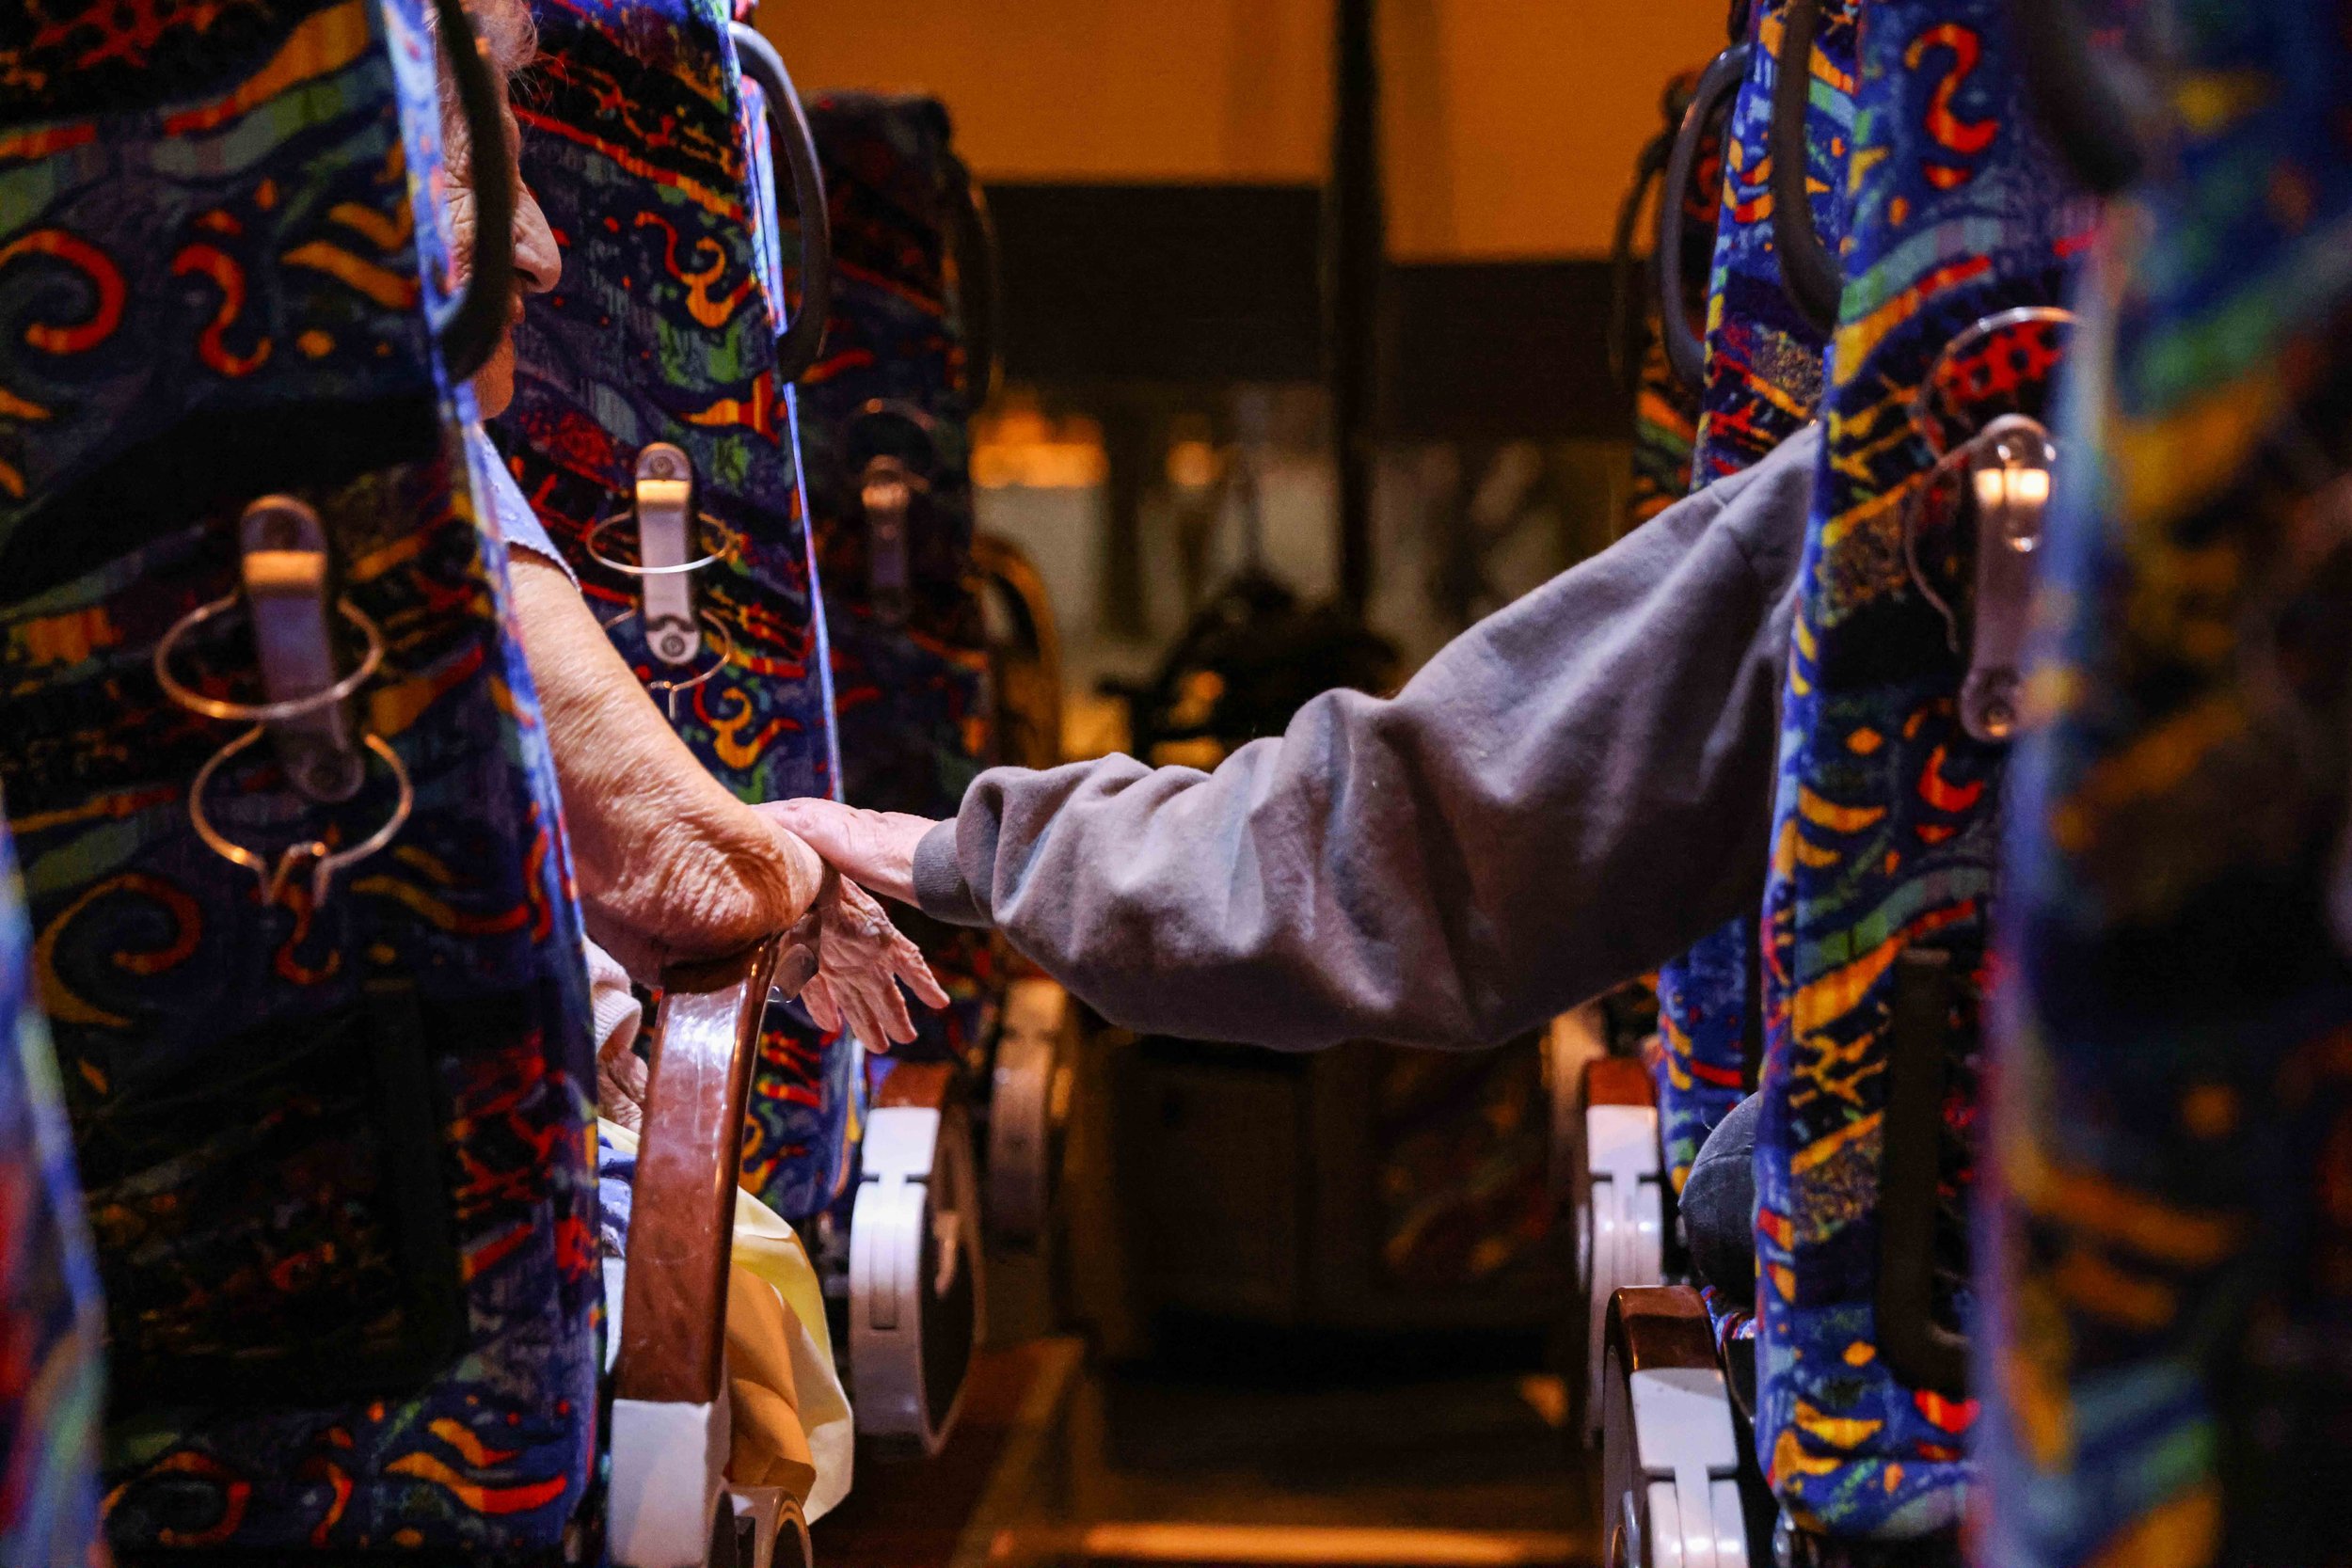  Gloria Sanders, 76, reaches for her mother's arm, Maria Barajas, 100, as it rests on the armrest of her seat to try to calm her down as they prepare to spend the night on the bus that serves as warming center located in Pleasant Oaks Recreation Cent